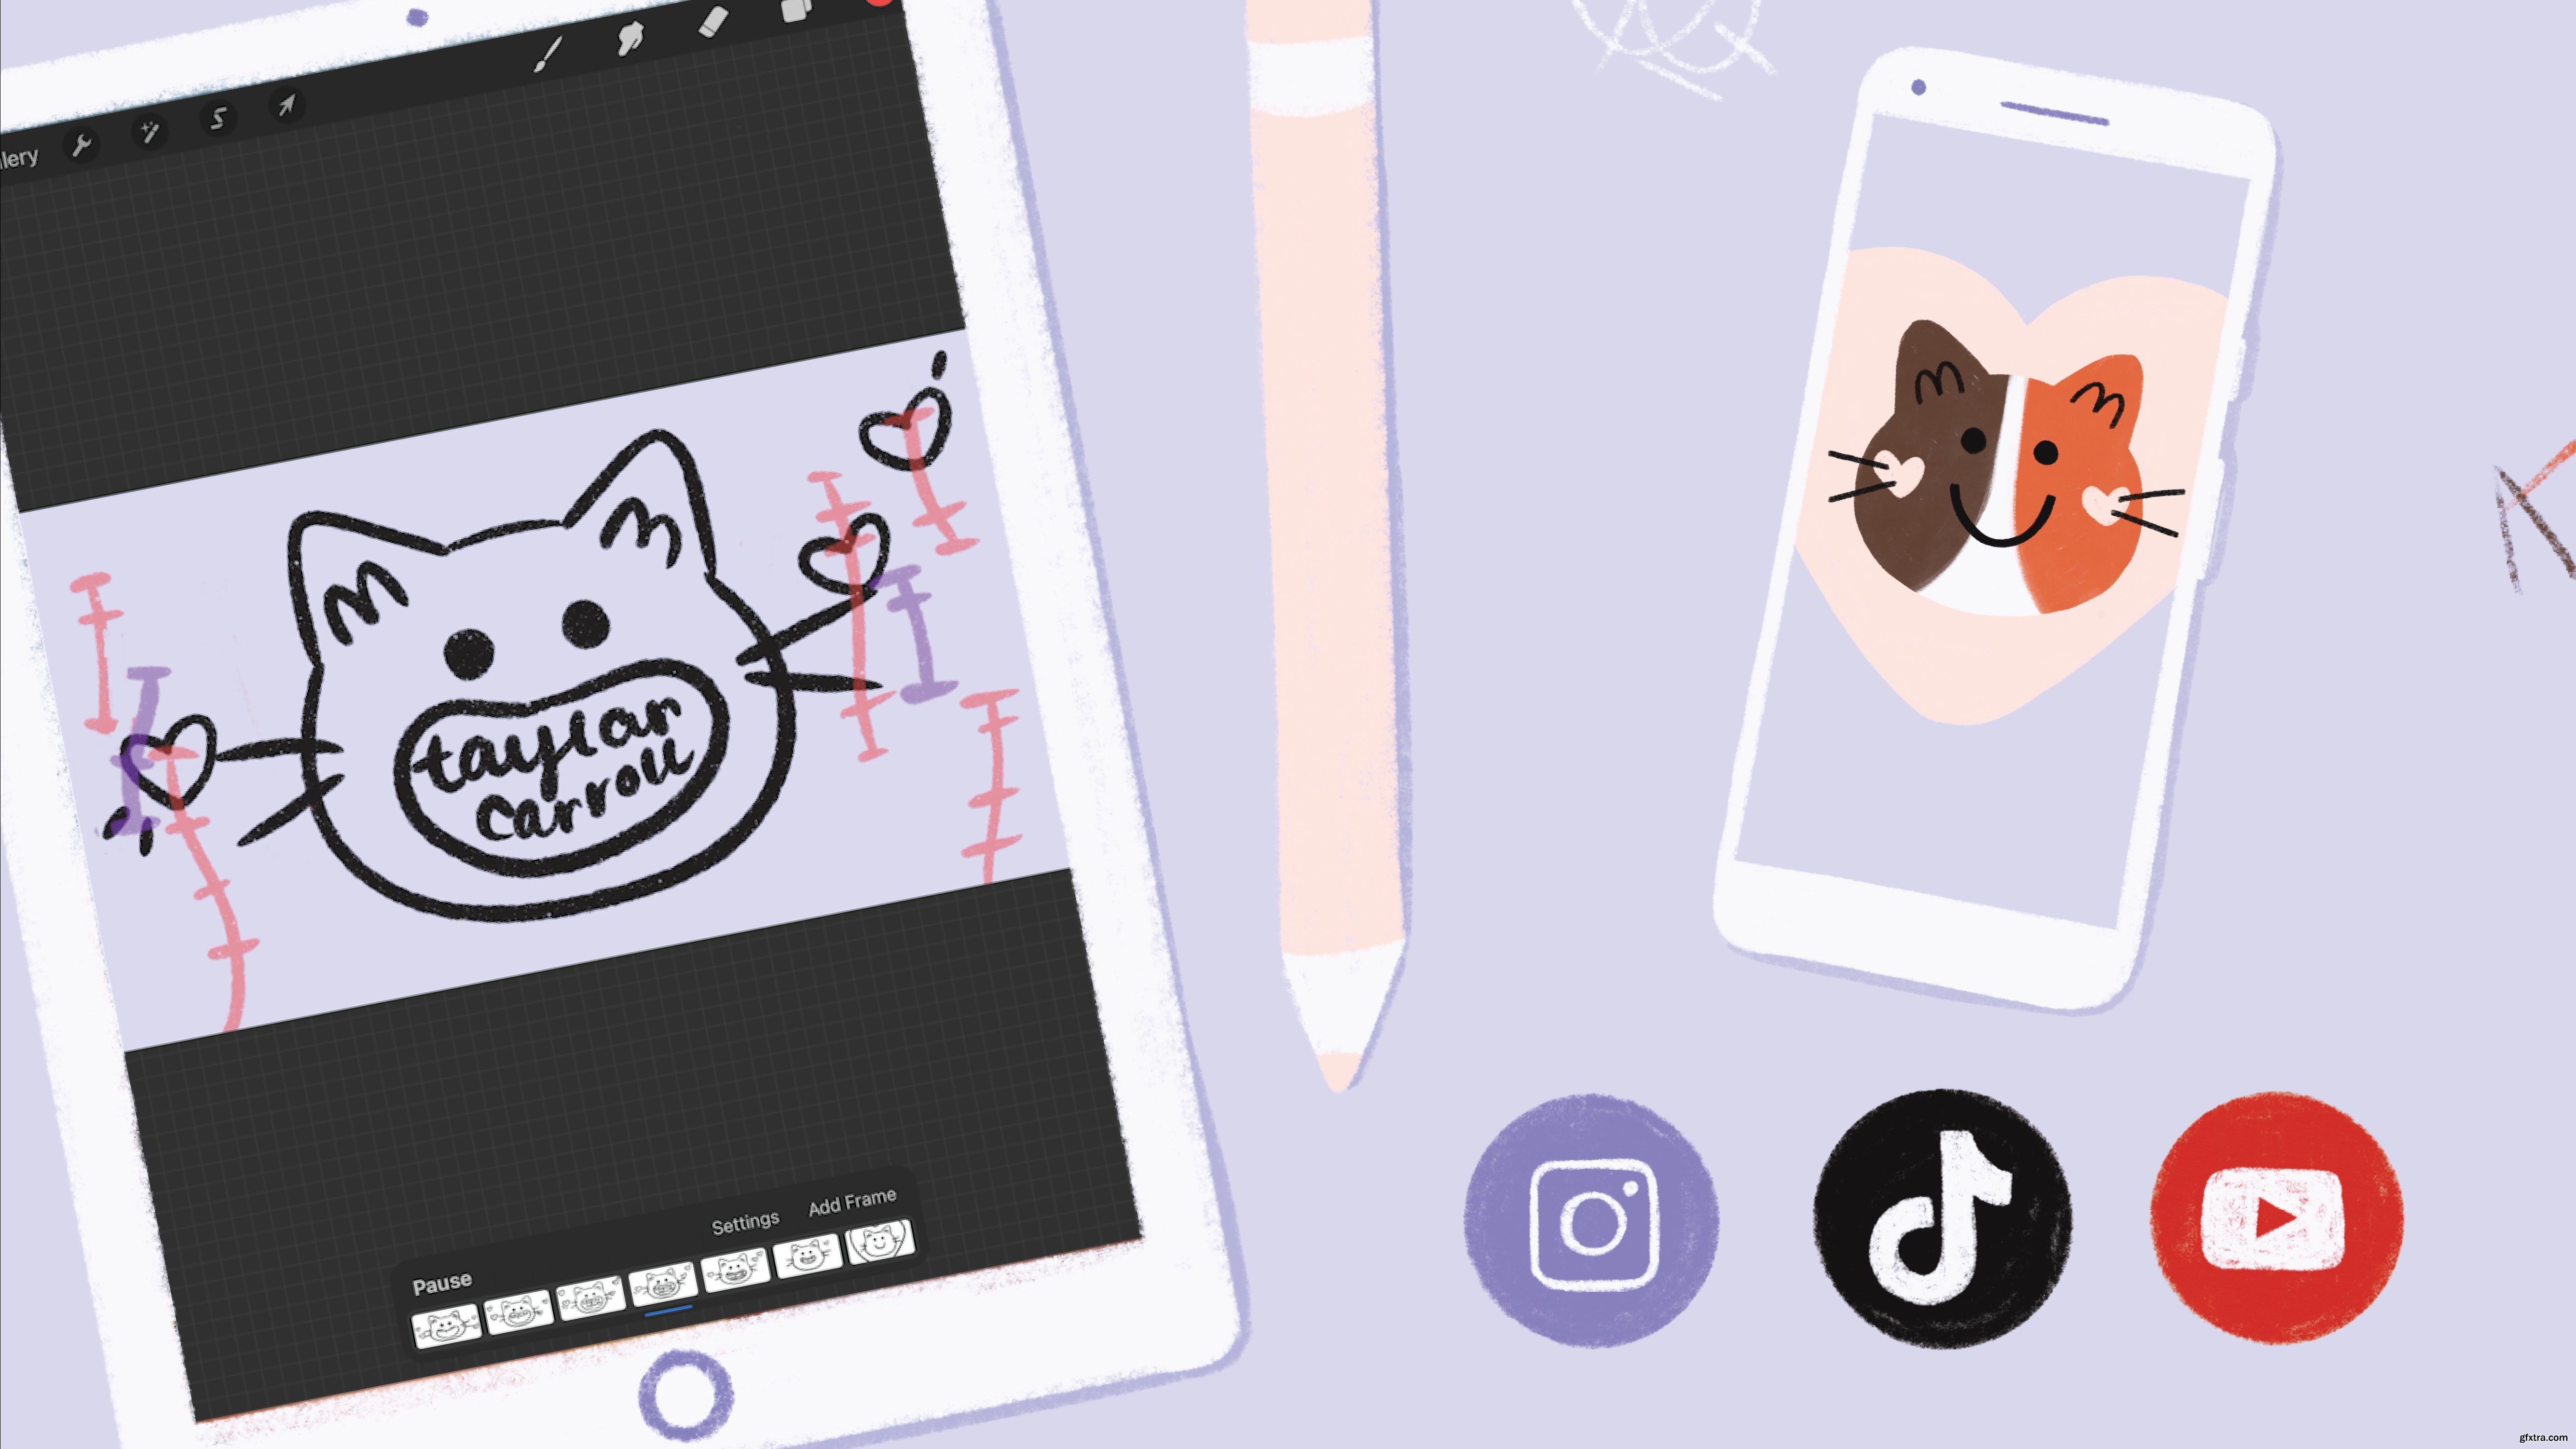 Animate Your Brand! Animation Templates in Procreate for Social Media